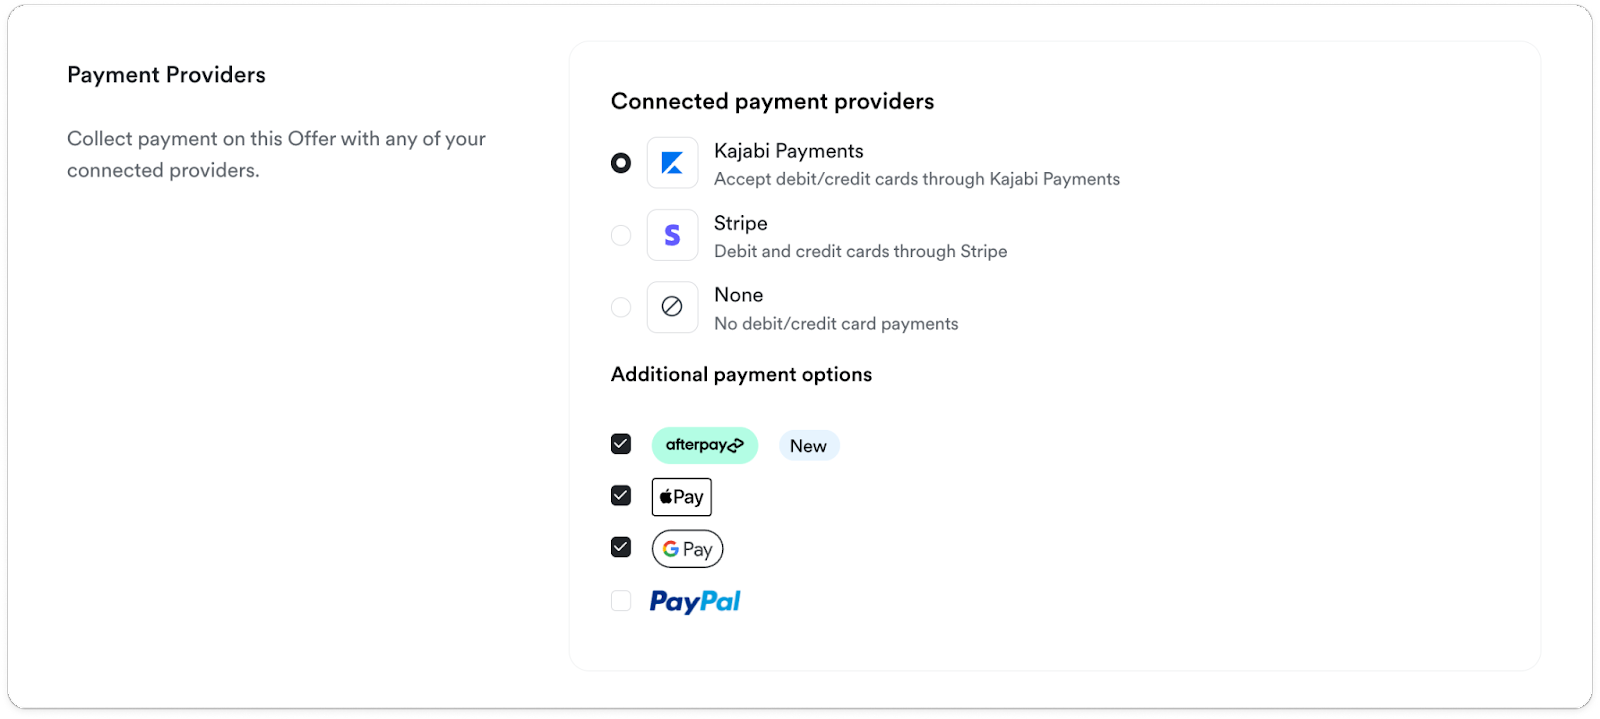 how-to-enable-afterpay-on-kajabi-payments-offers-hc-draft-google-docs-1.png